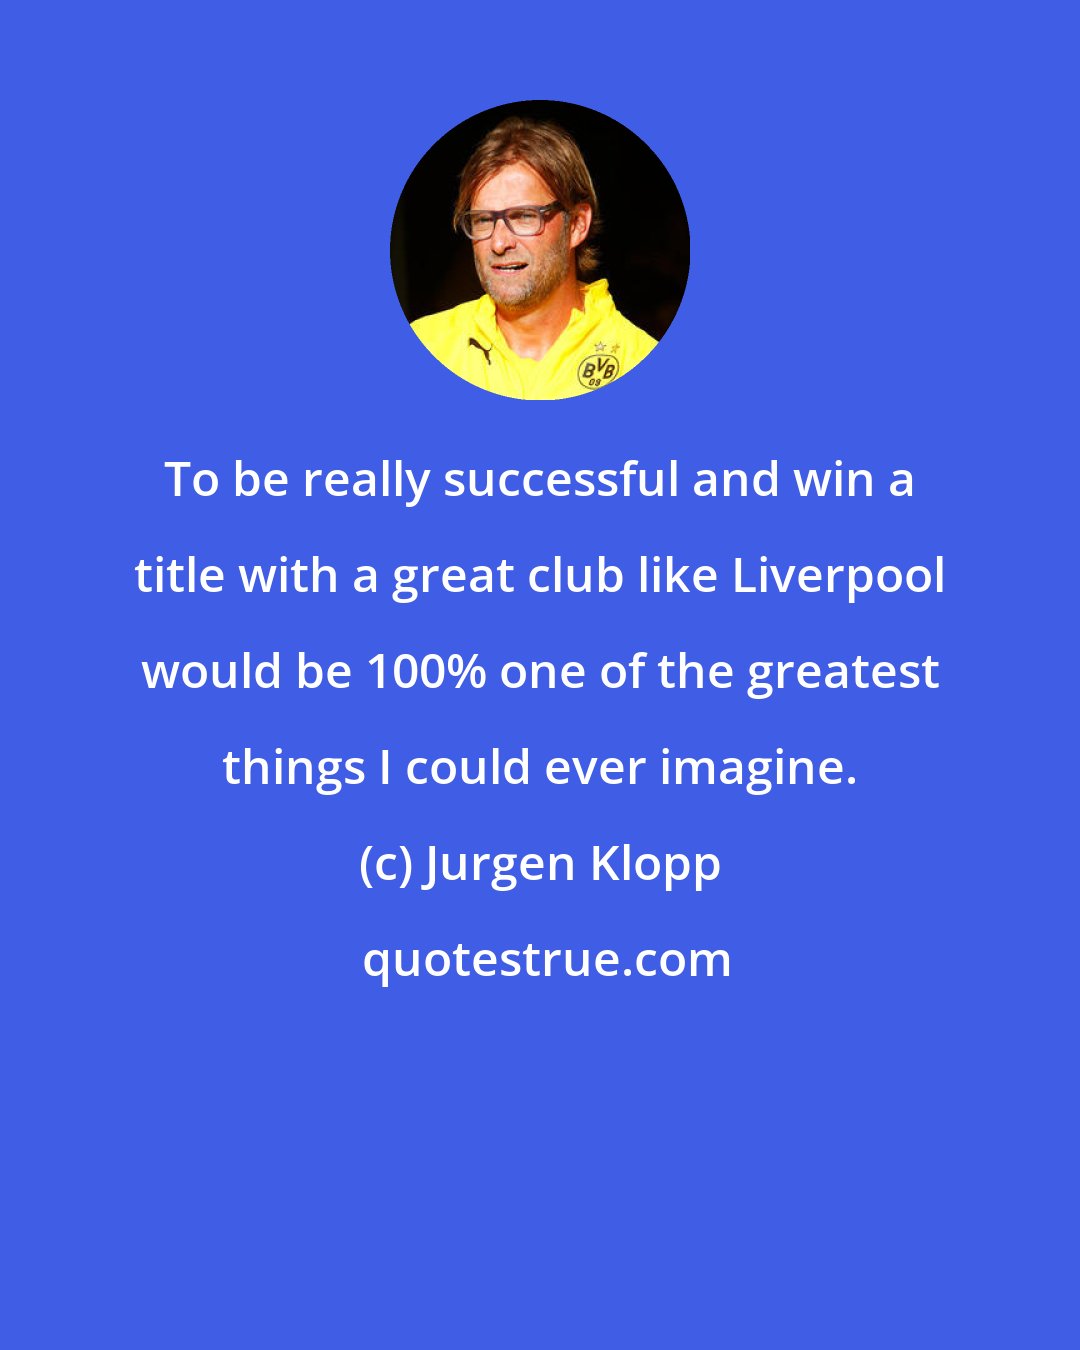 Jurgen Klopp: To be really successful and win a title with a great club like Liverpool would be 100% one of the greatest things I could ever imagine.